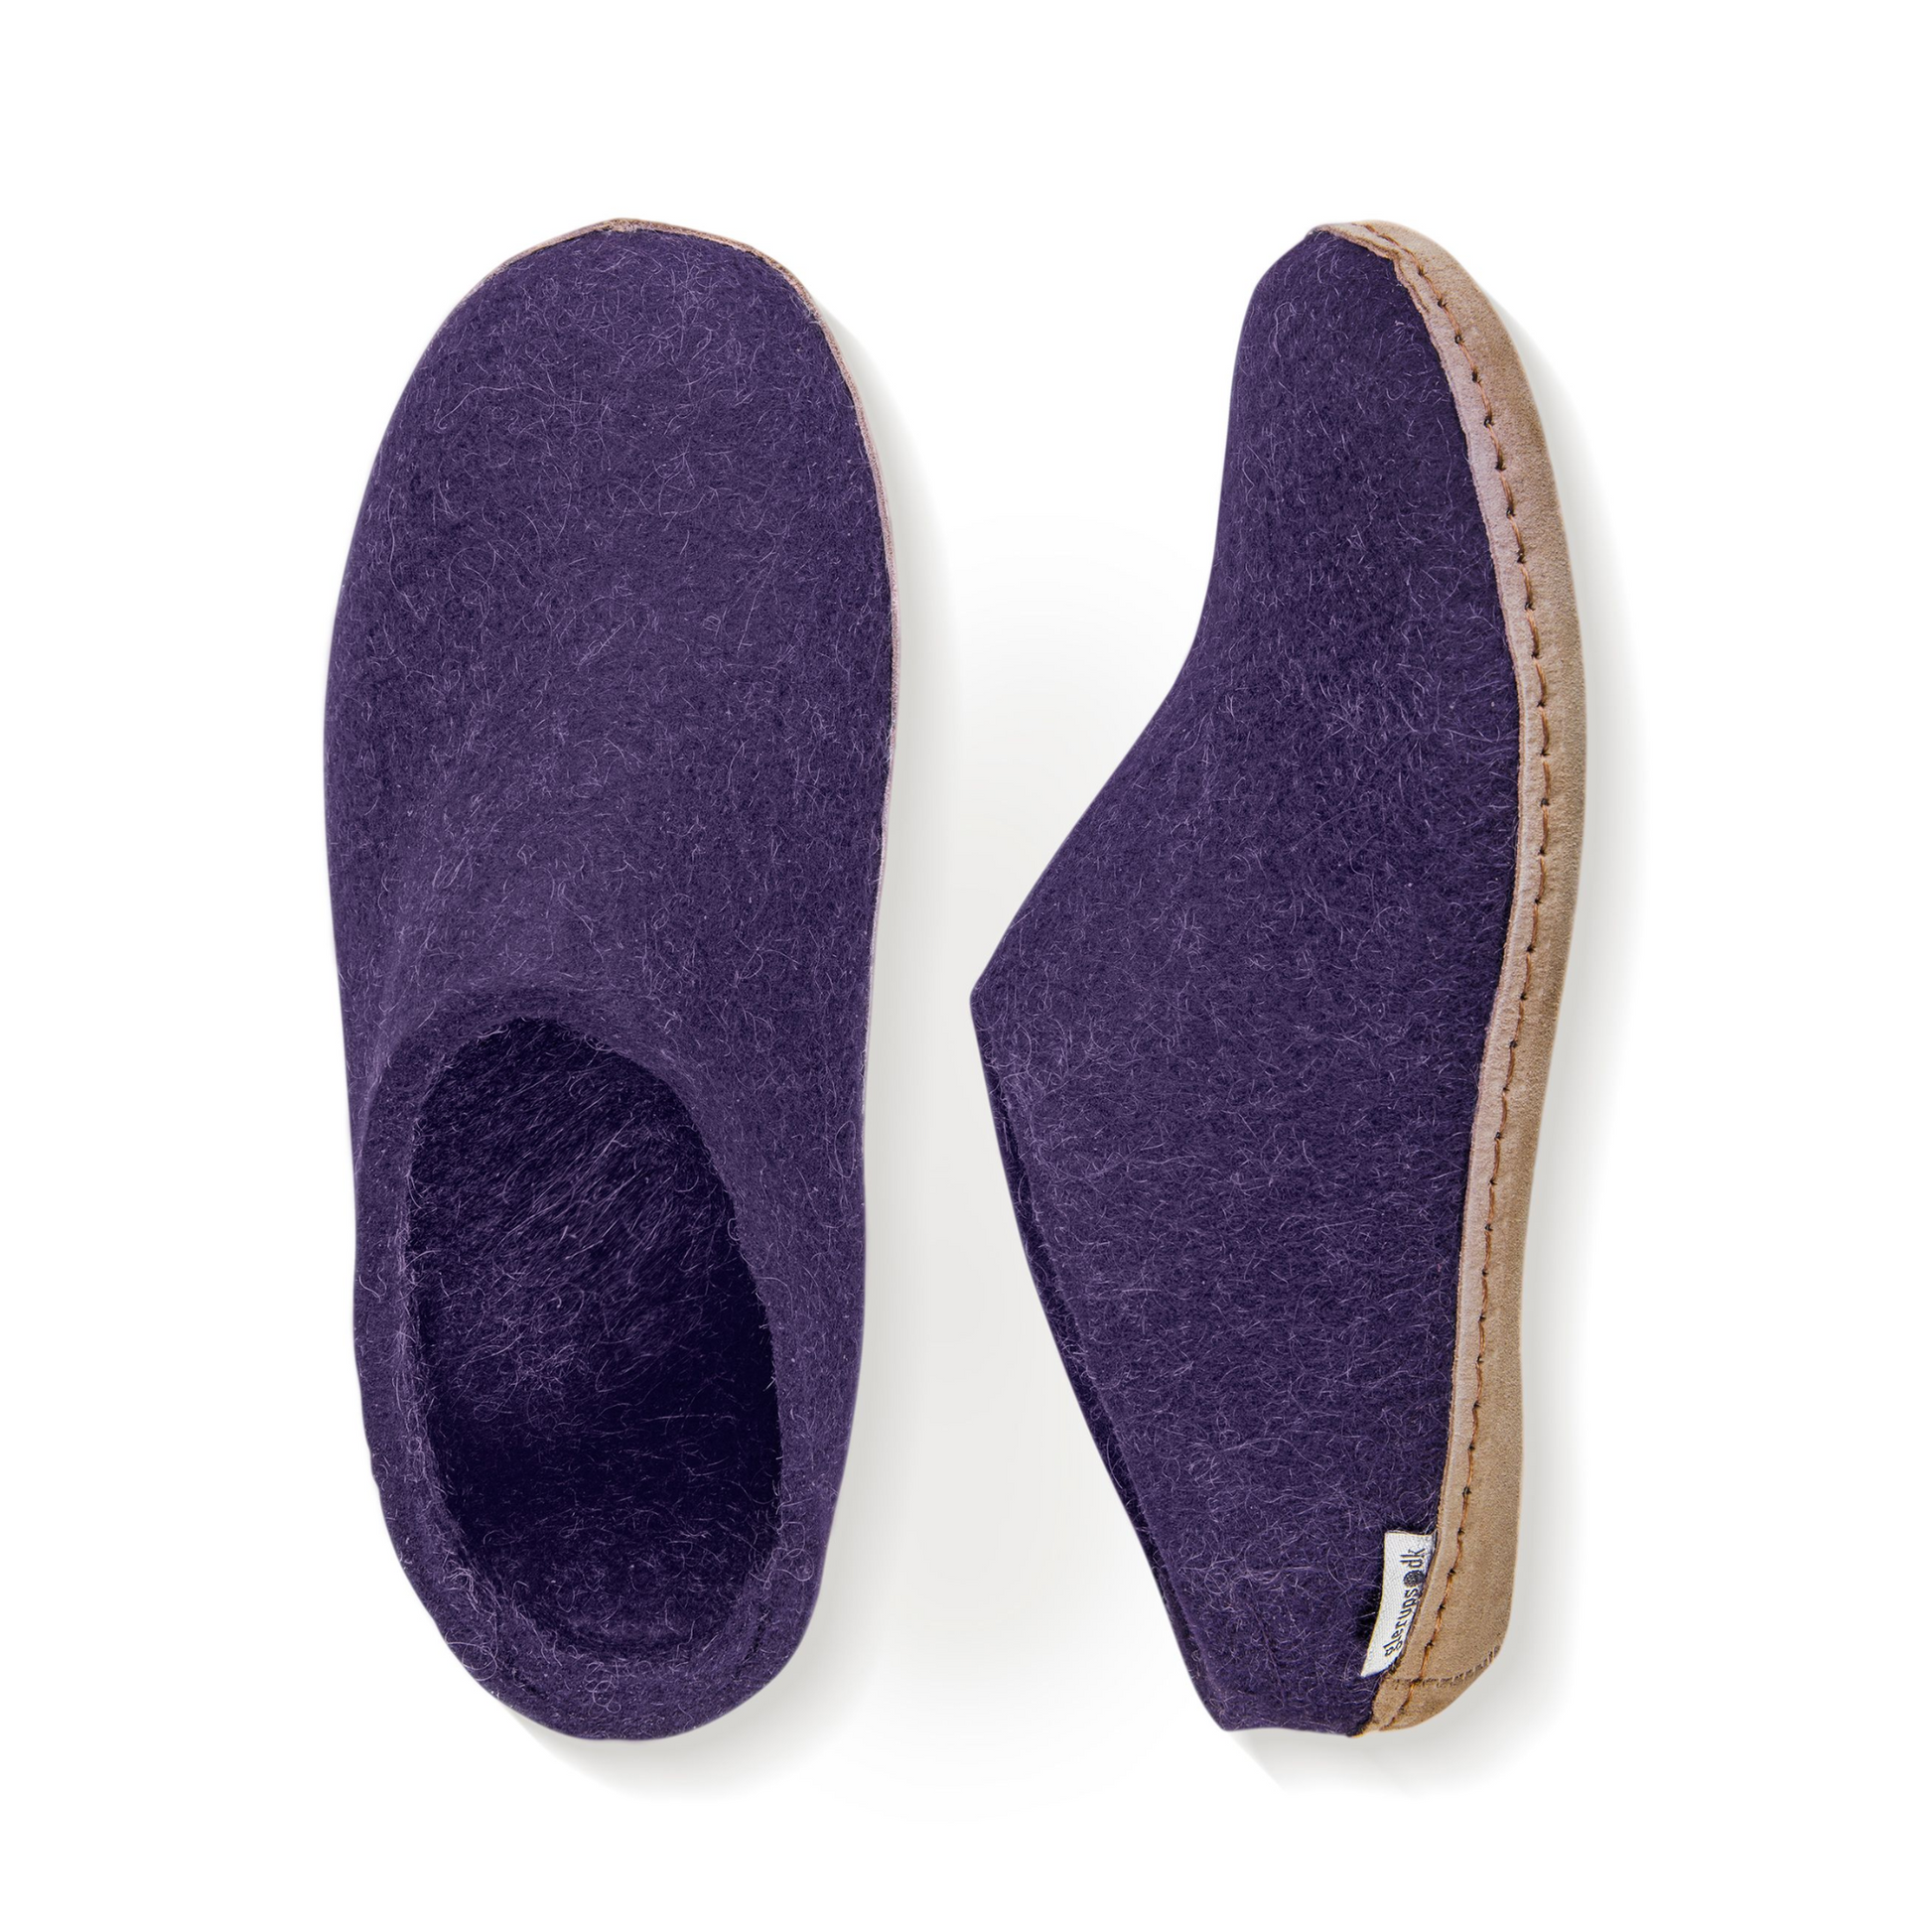 A pair of purple felted slippers is pictured from above. The heel has a low back while the sole is covered in tan leather.